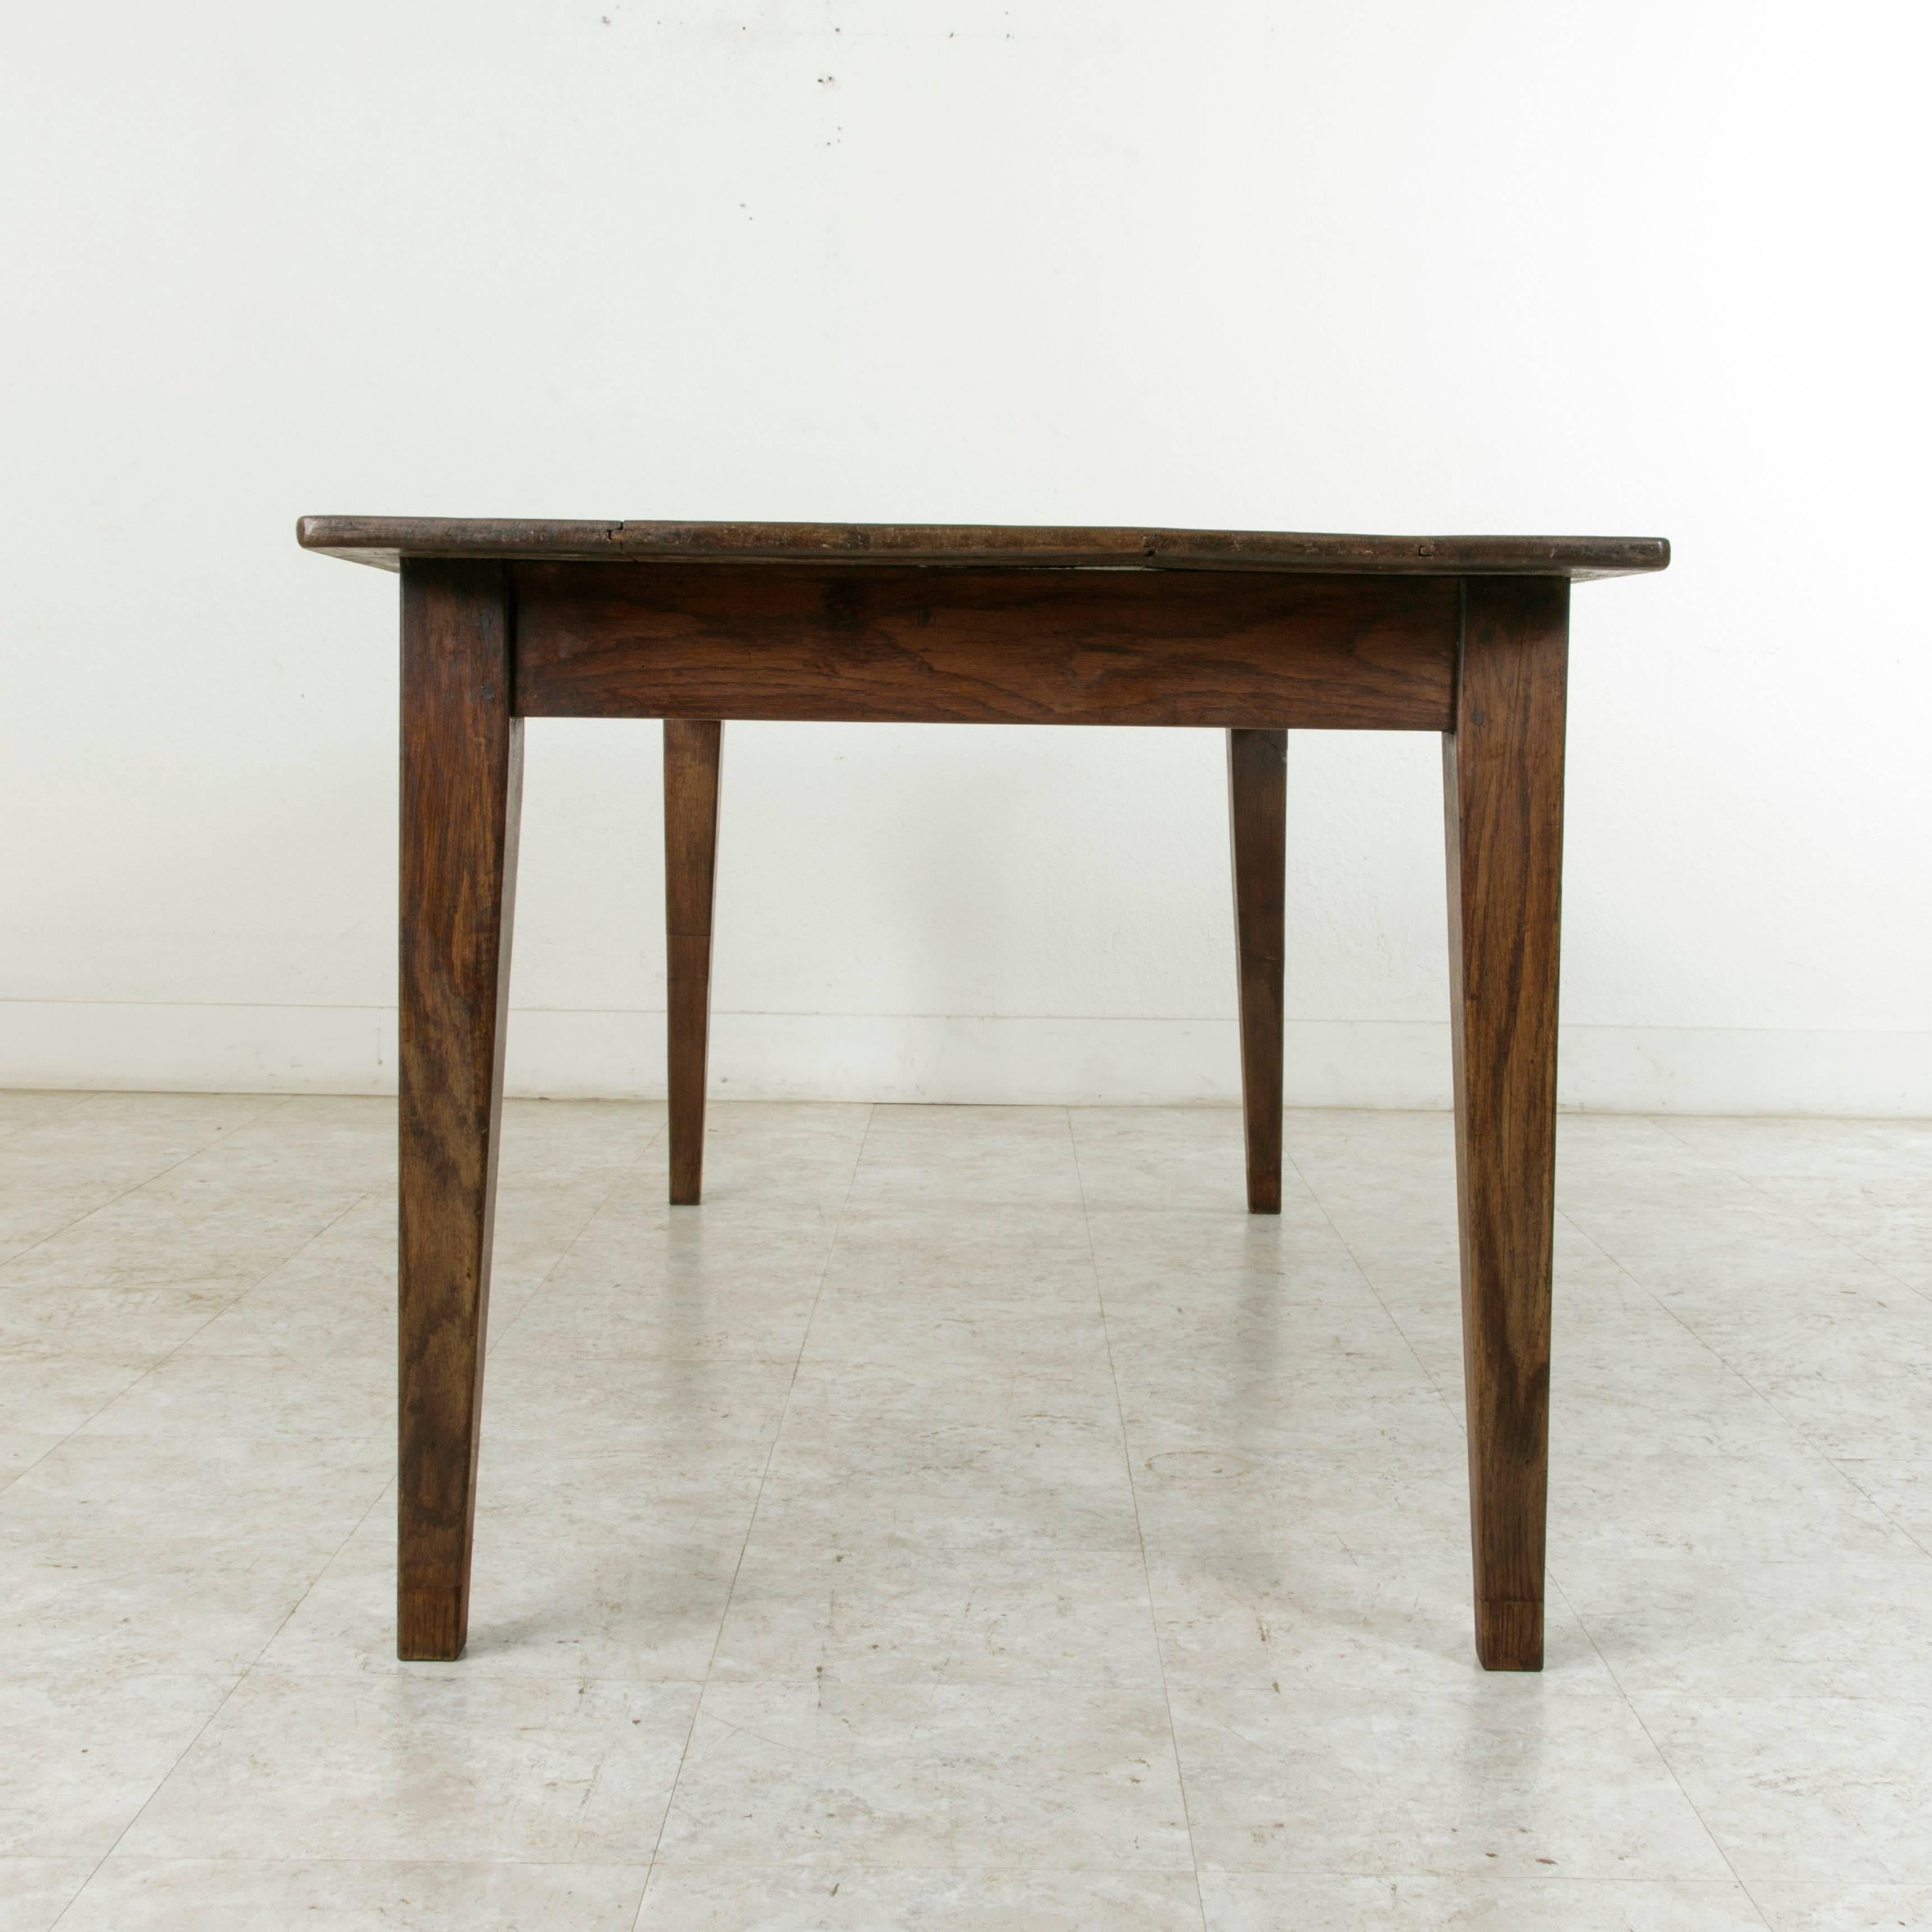 Mid-20th Century Early 20th Century French Oak Farm Table, Dining Table with Drawer from Normandy